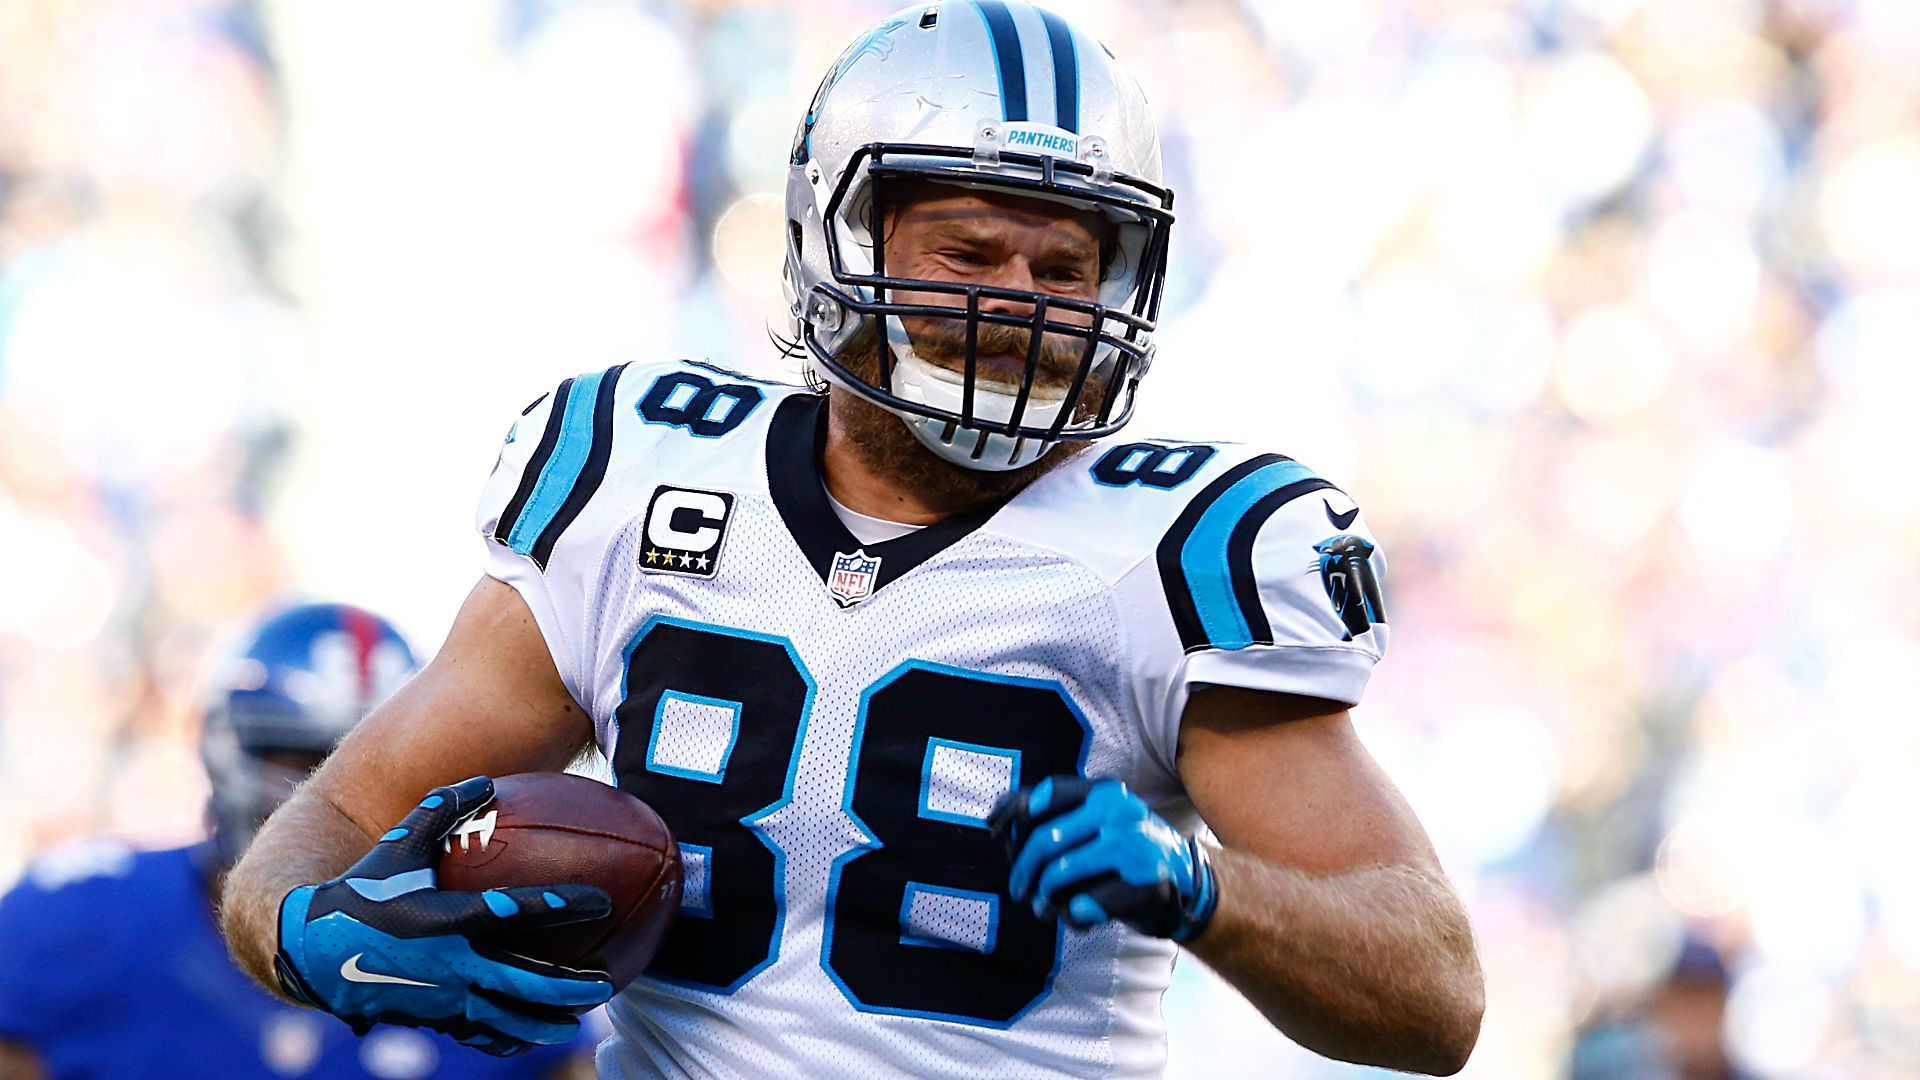 Greg Olsen's slow move to the Fox NFL broadcast booth is now complete